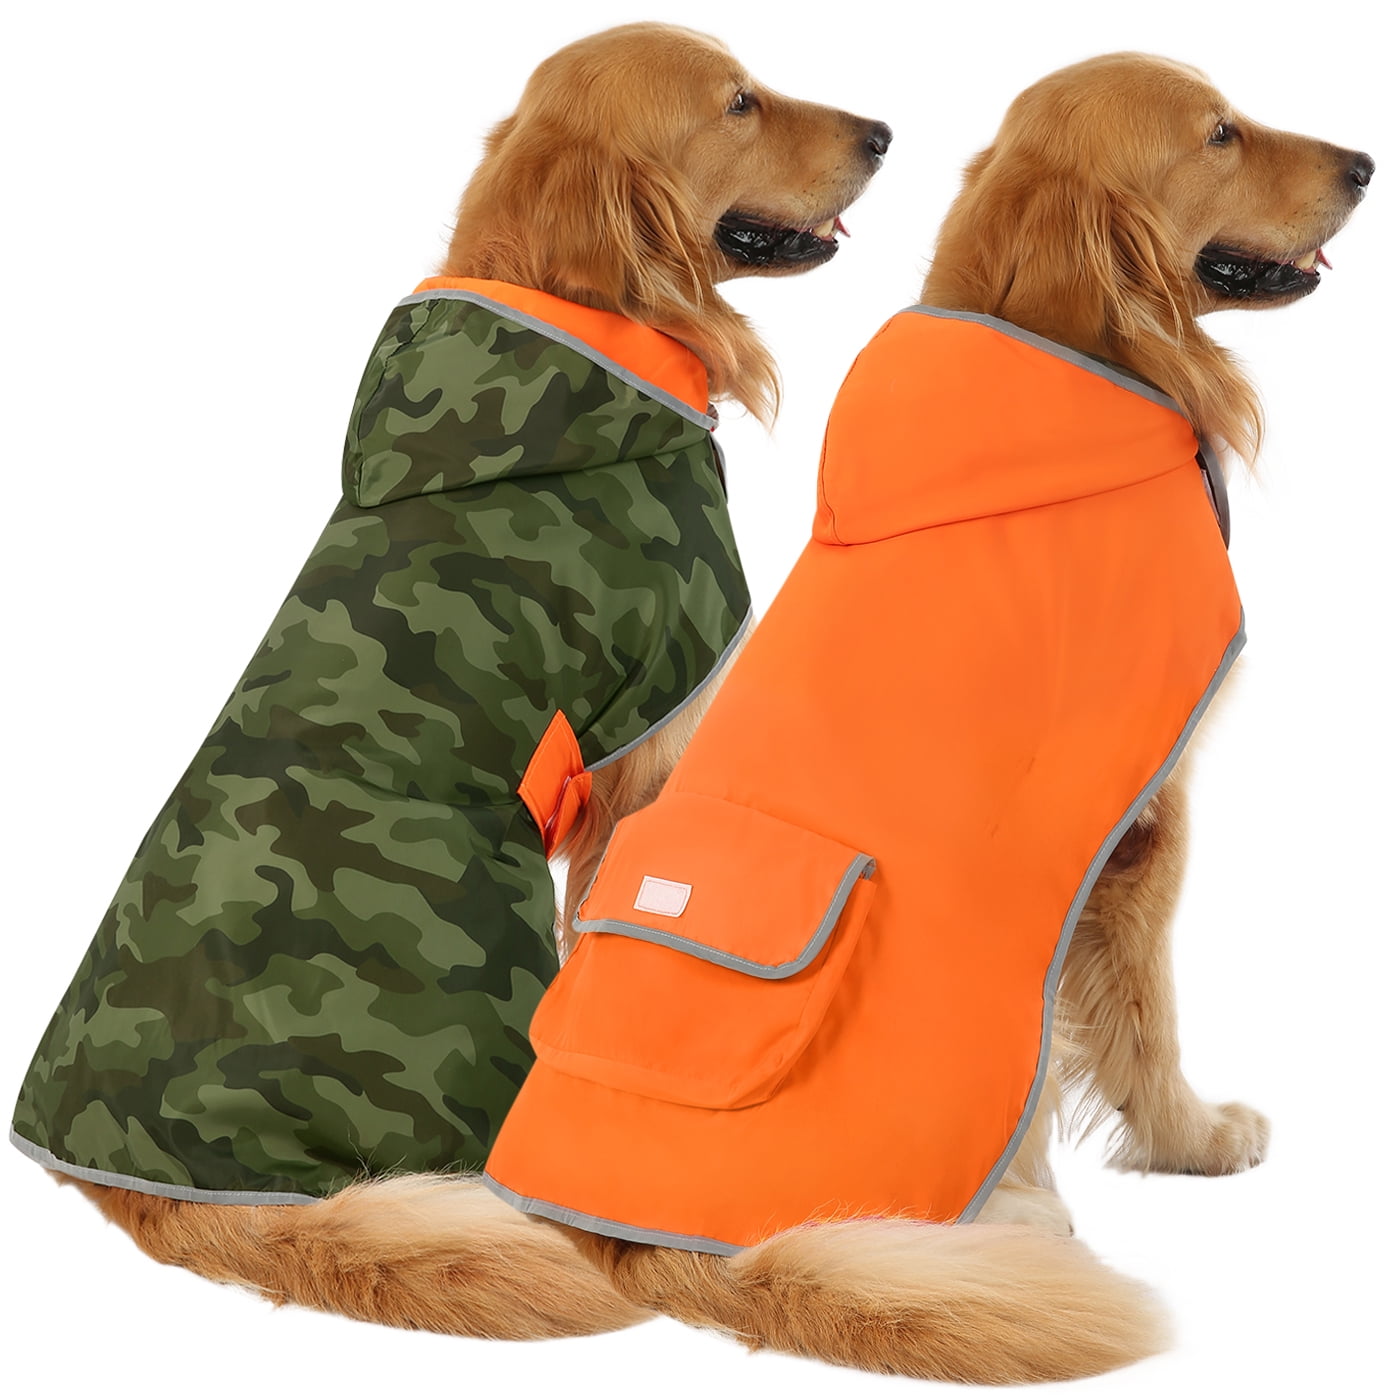 Dog Warm Thick White Duck Down Vest The Dog Face Winter Puppy Pet